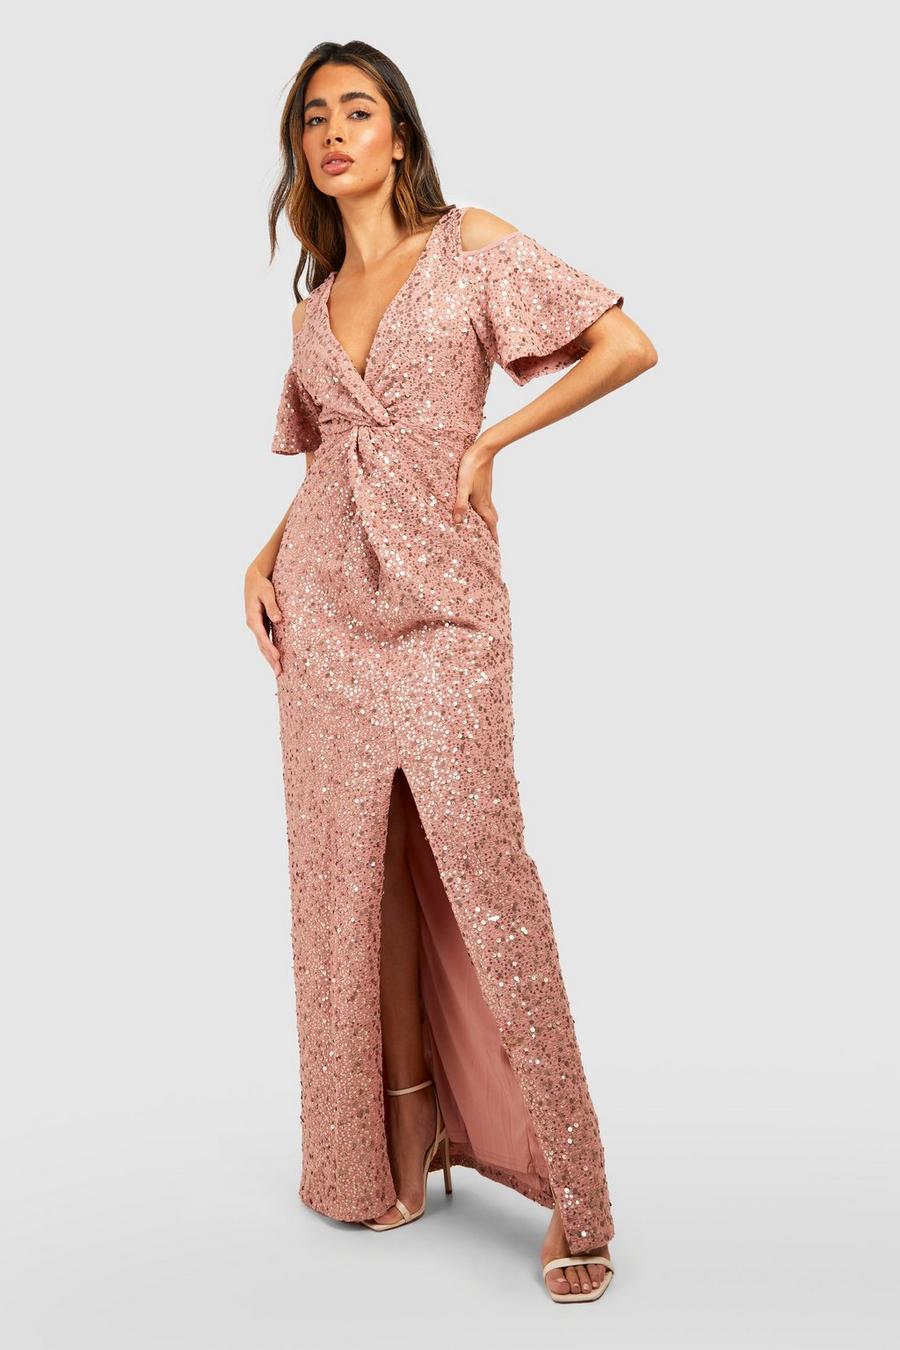 Blush rose Bridesmaid Occasion Sequin Knot Front Maxi Dress